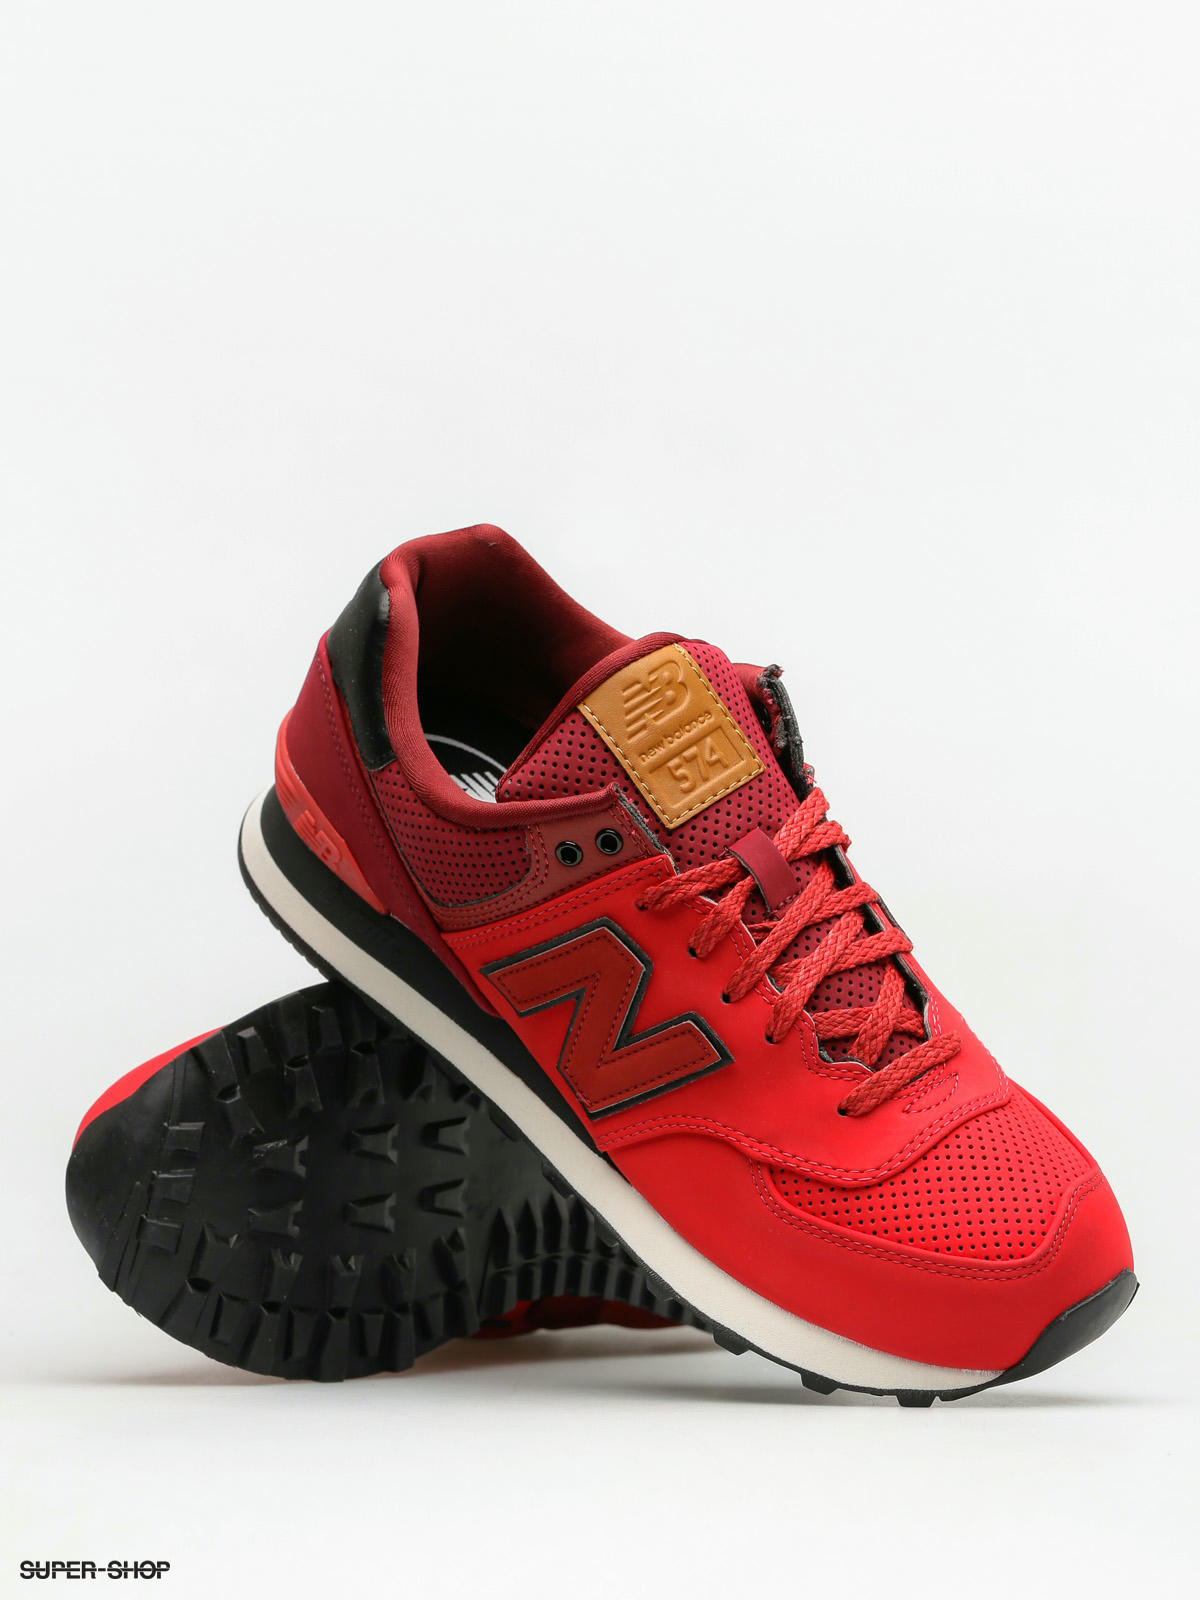 red new balance shoes 574